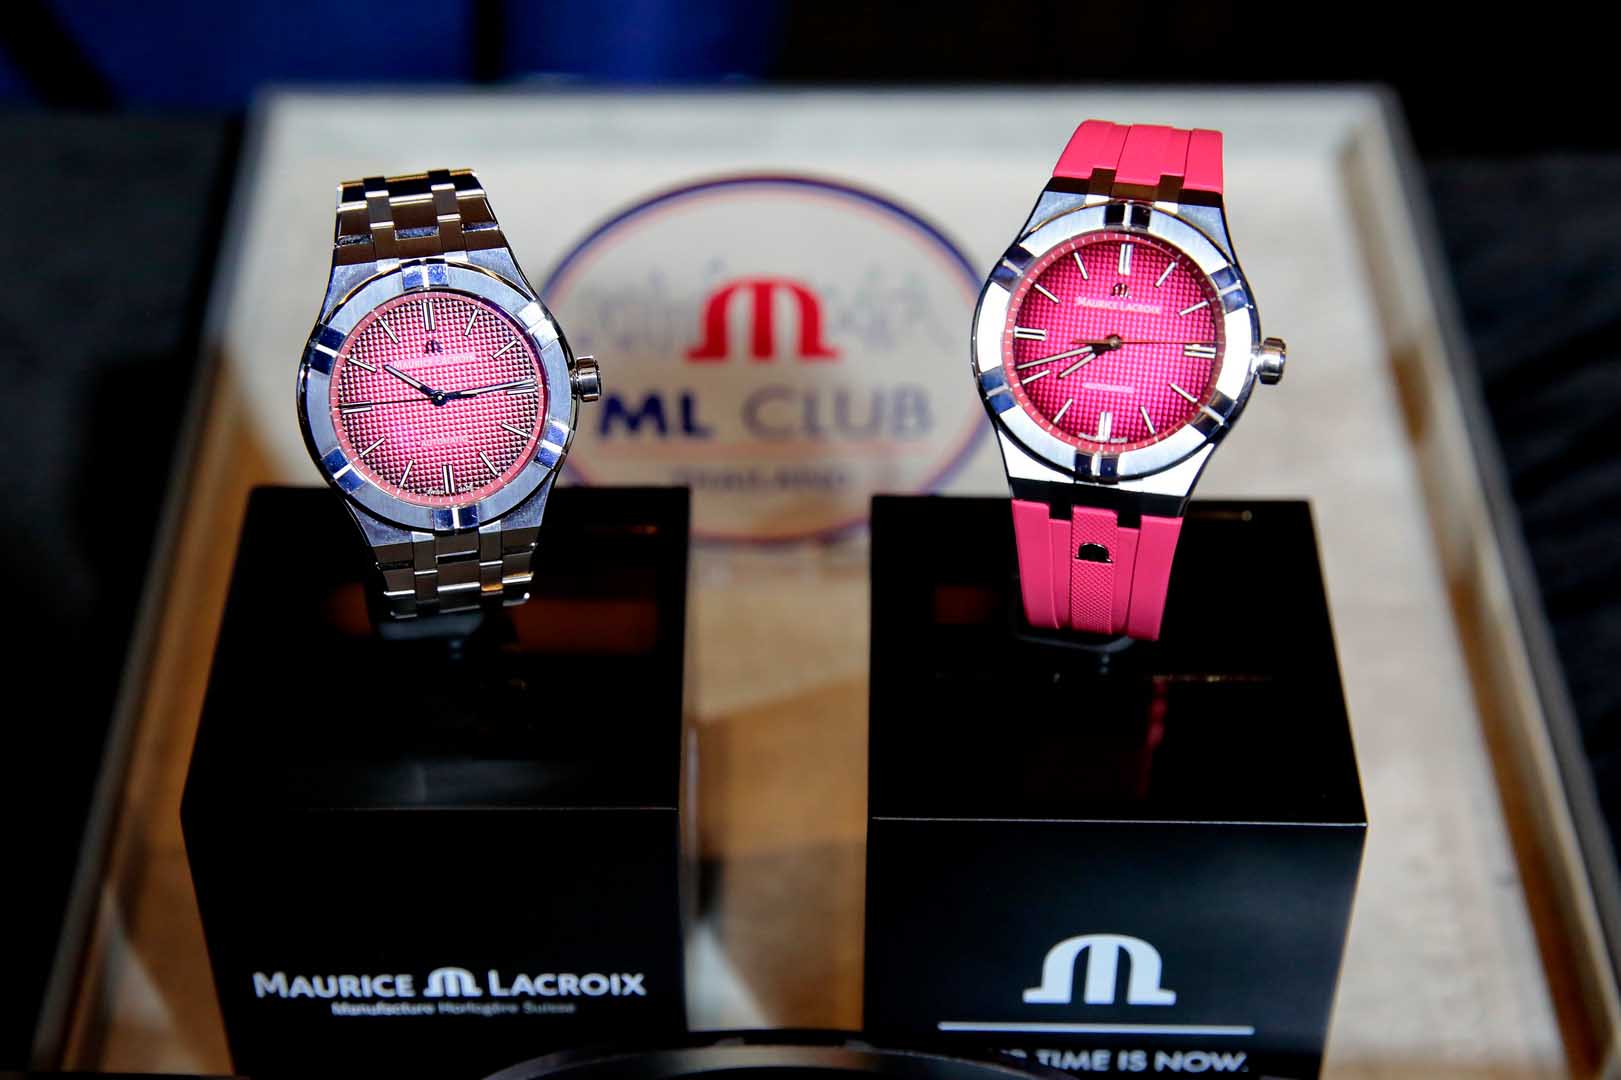 Maurice Lacroix ML Club Thailand Limited Edition